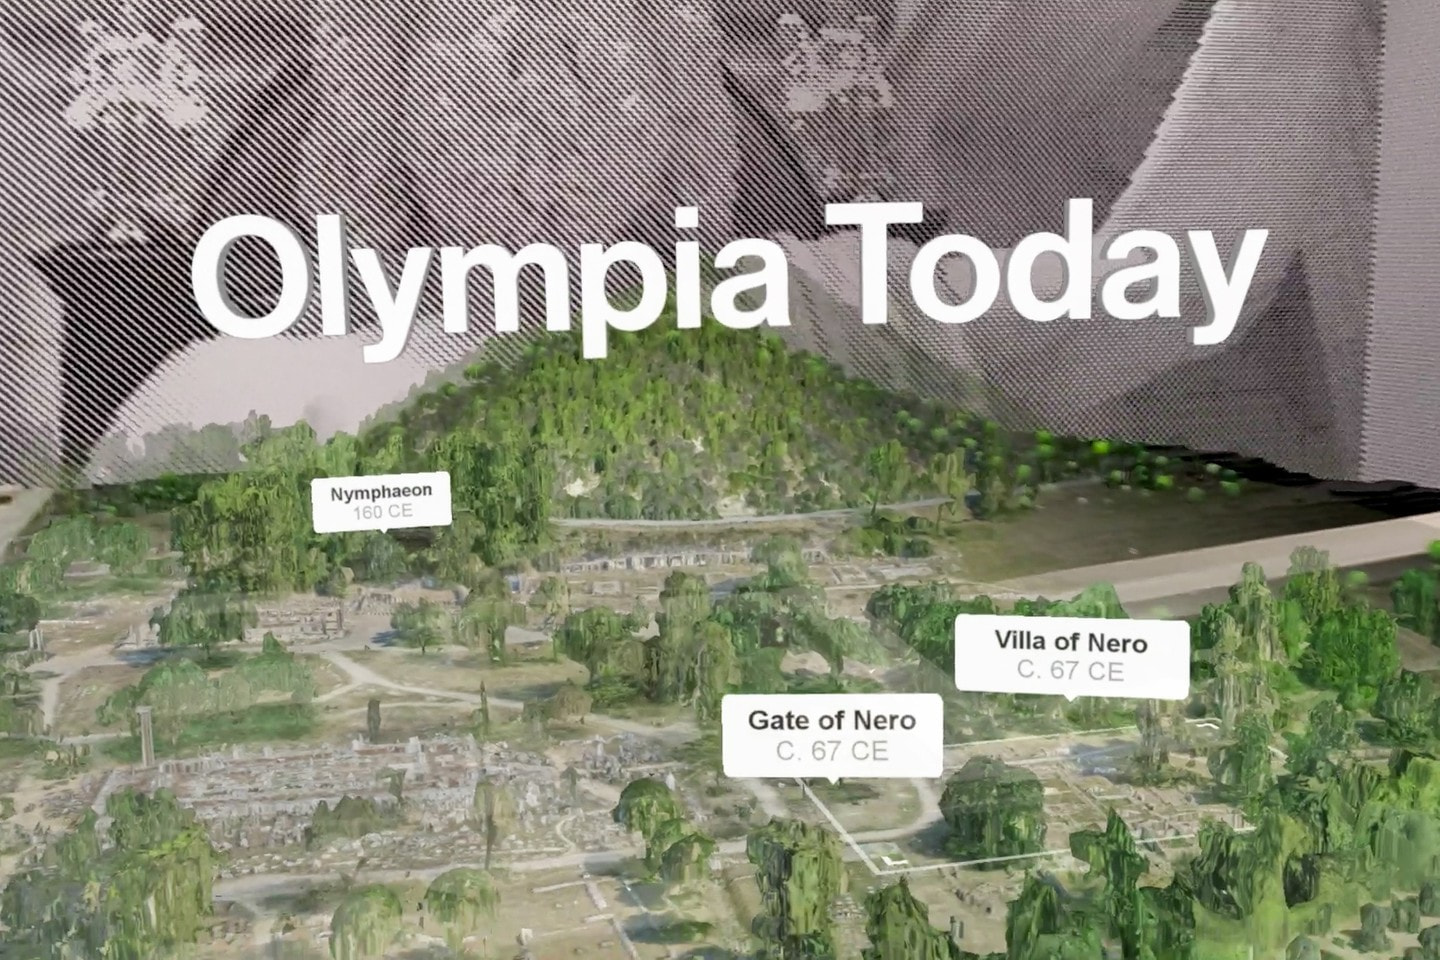 Photogrammetry of the ruins of Ancient Olympia superimposed over the model table